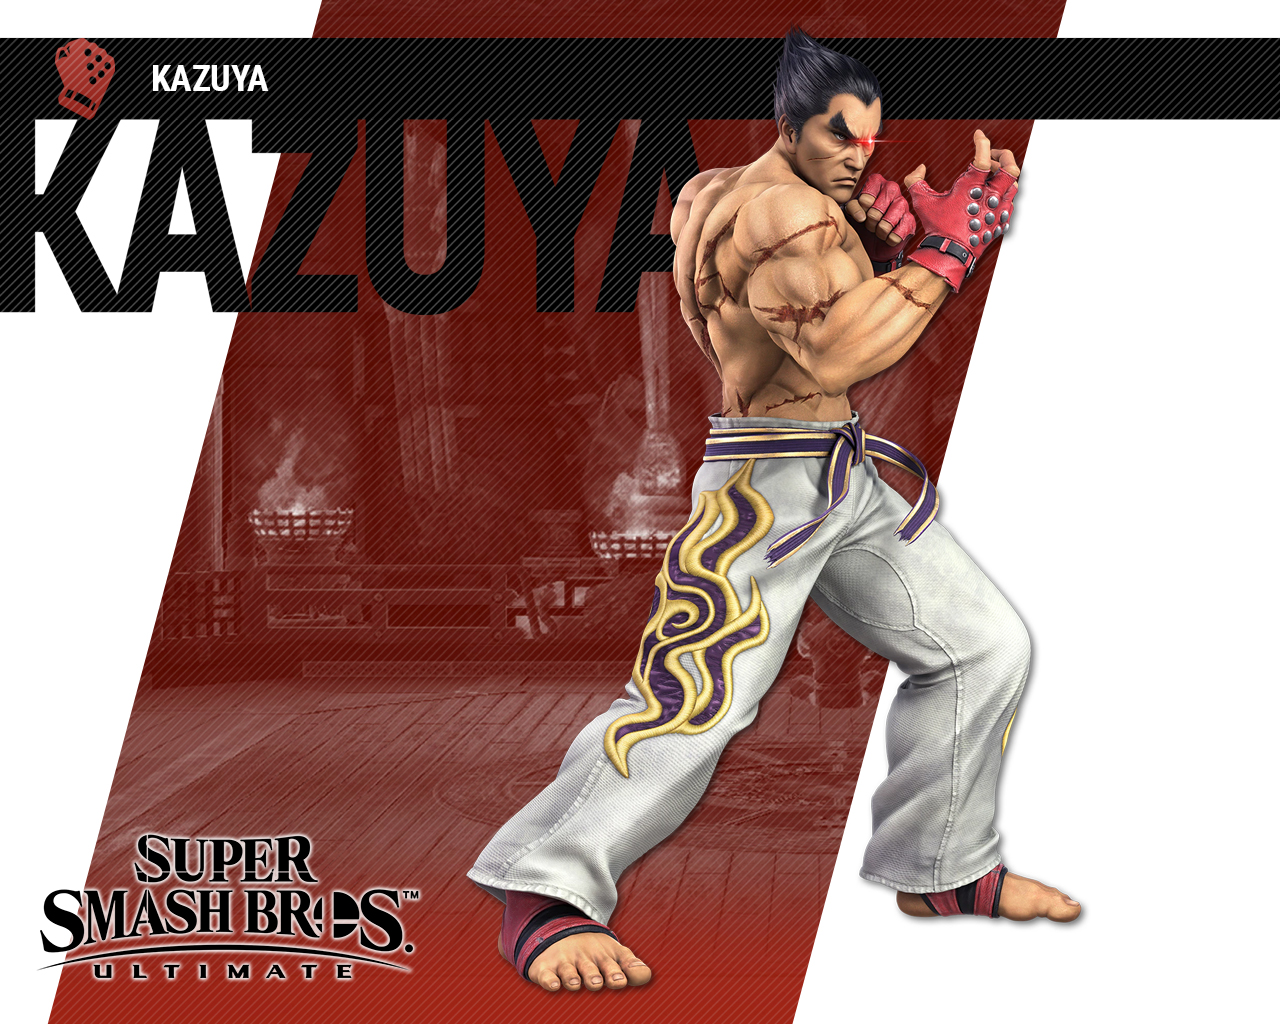 Super Smash Bros Ultimate Kazuya Wallpapers - Cat with Monocle